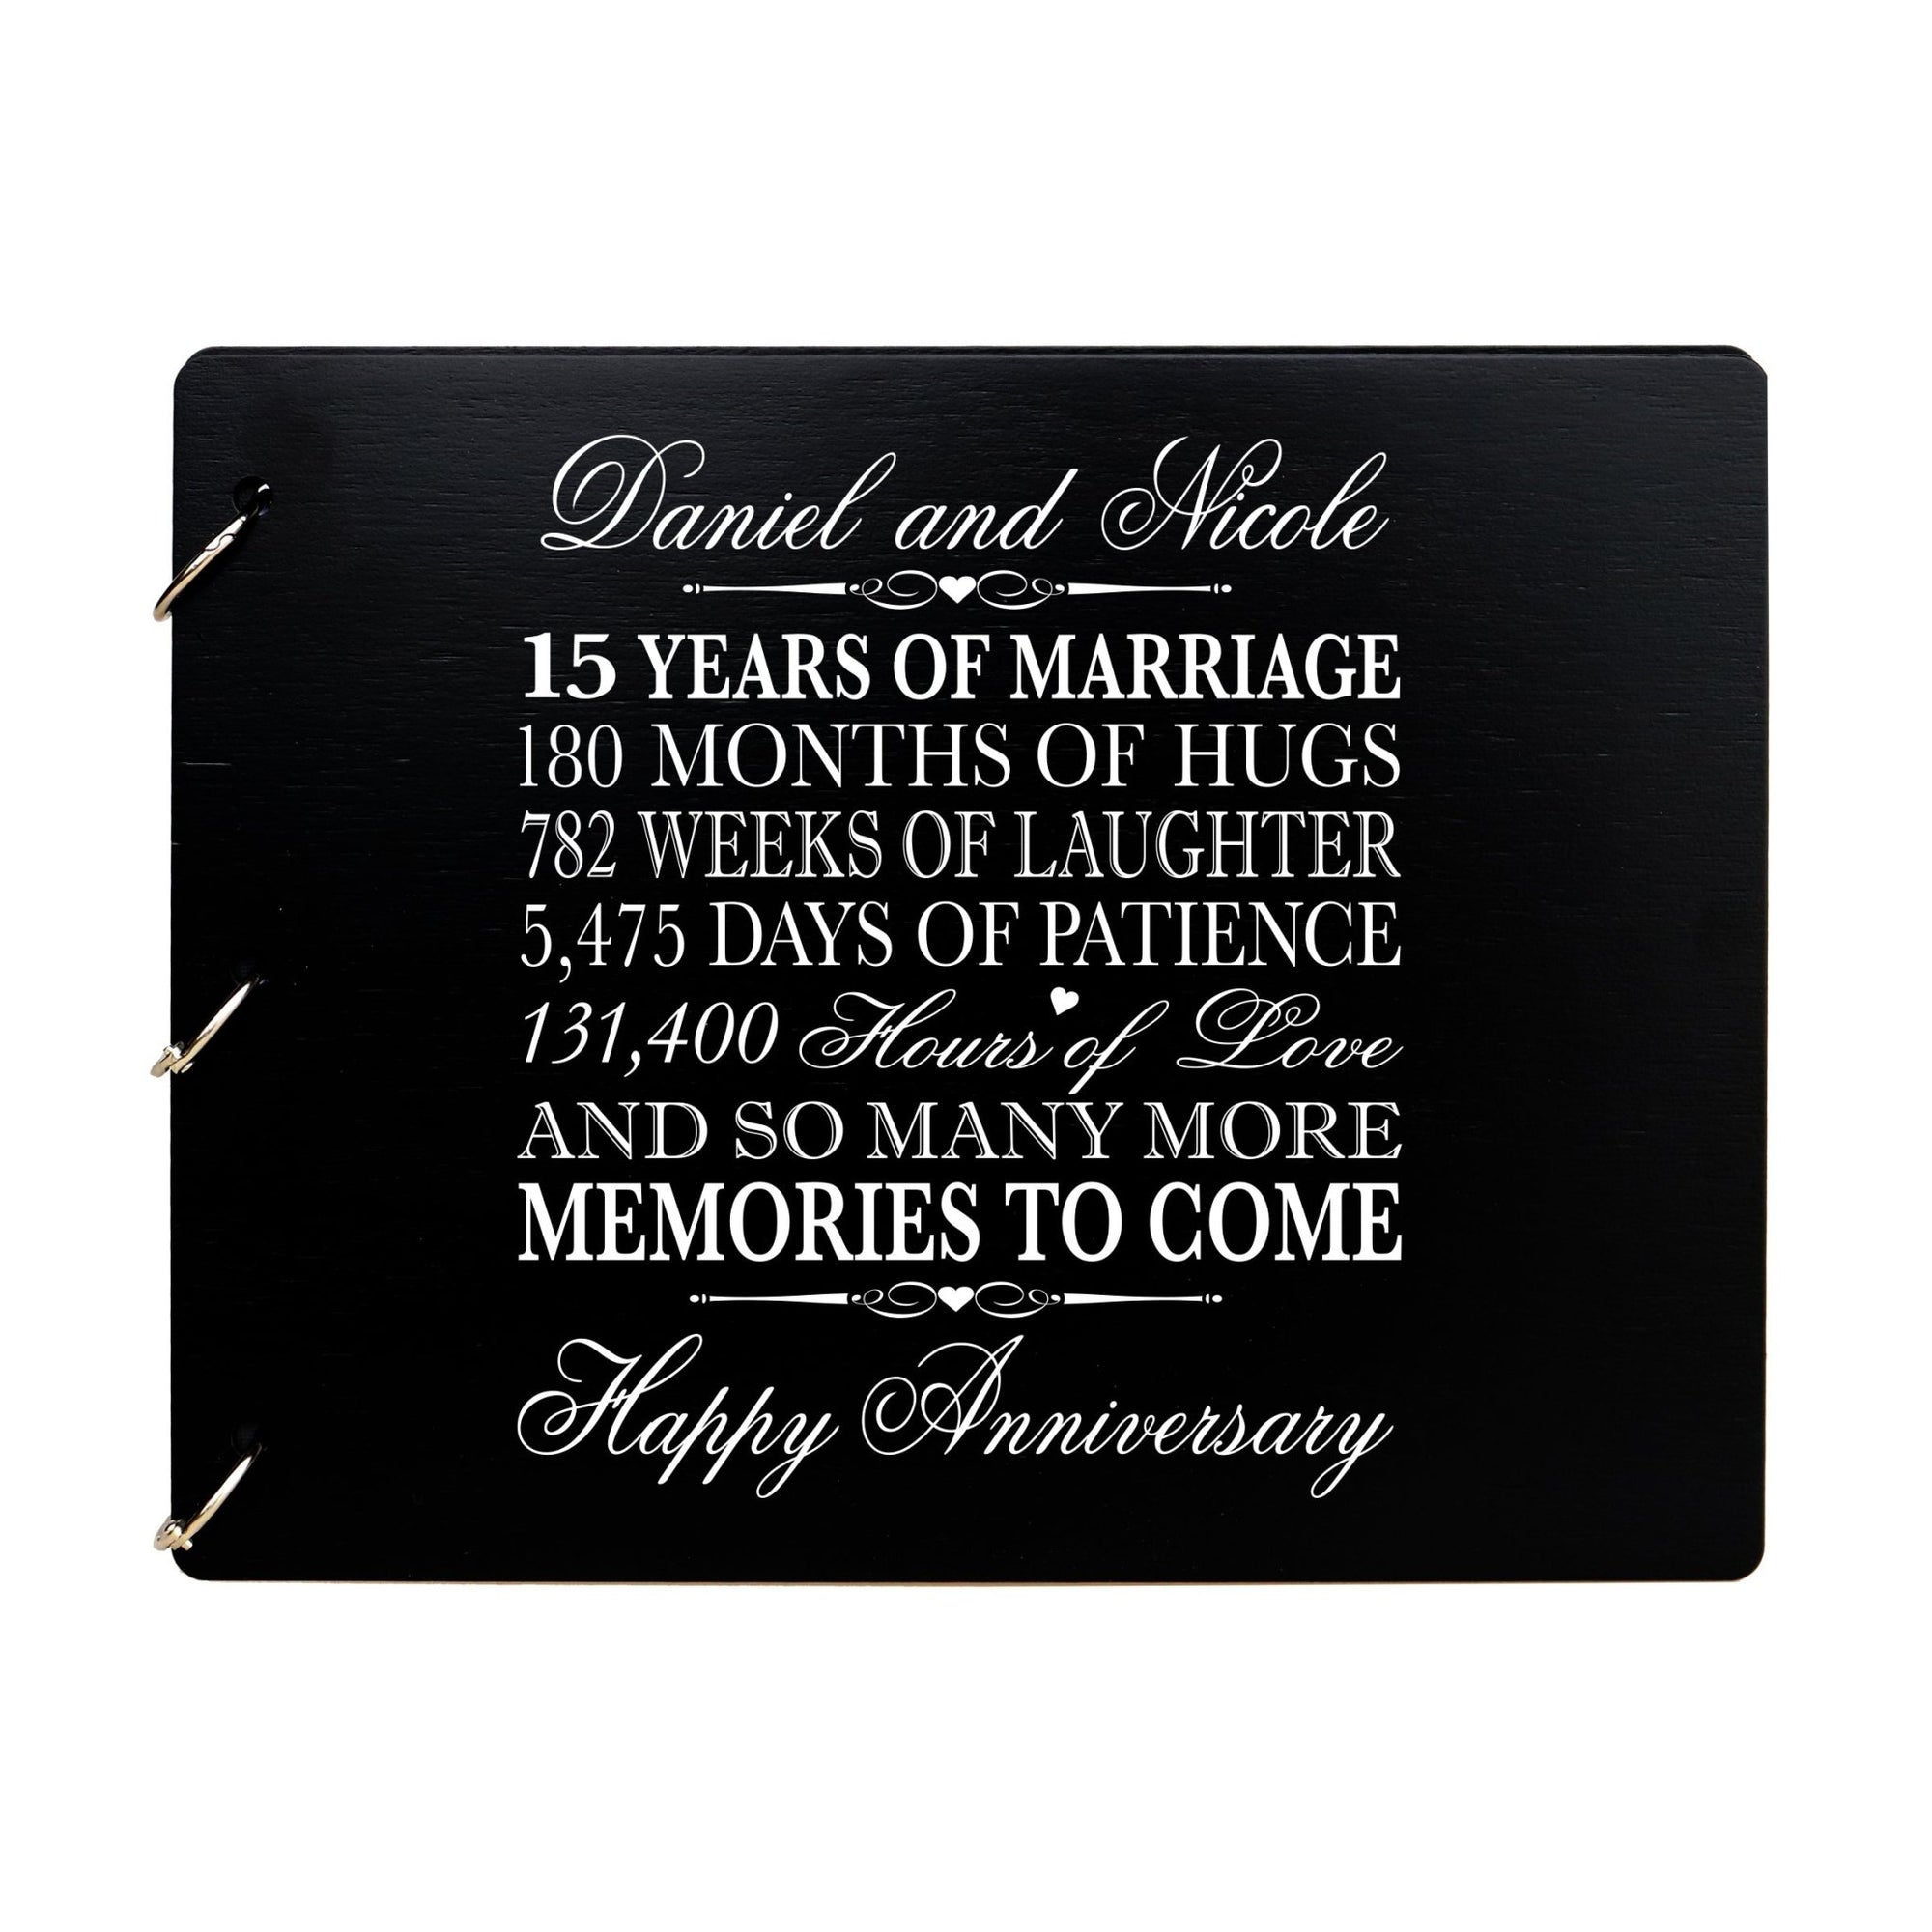 Personalized Guest Book Sign for 15th Wedding Anniversary - More Memories To Come - LifeSong Milestones